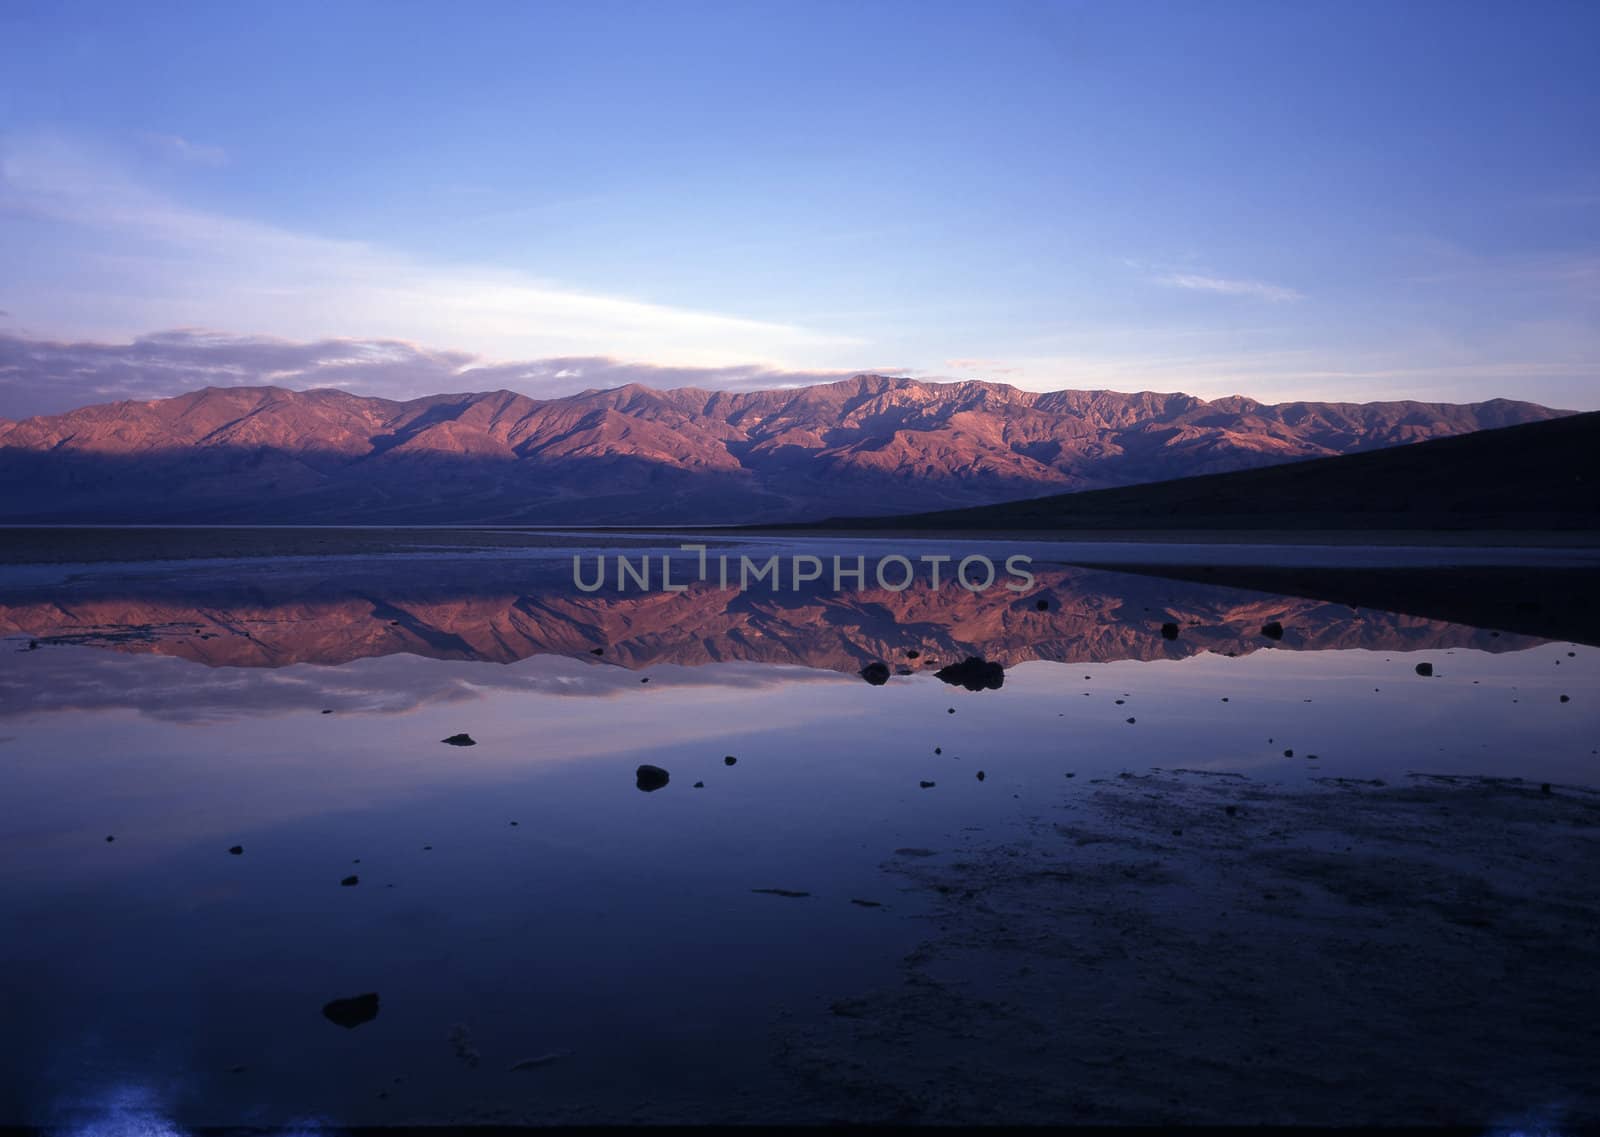 Badwater in Death Valley with elevation of -282 feet bellow see level